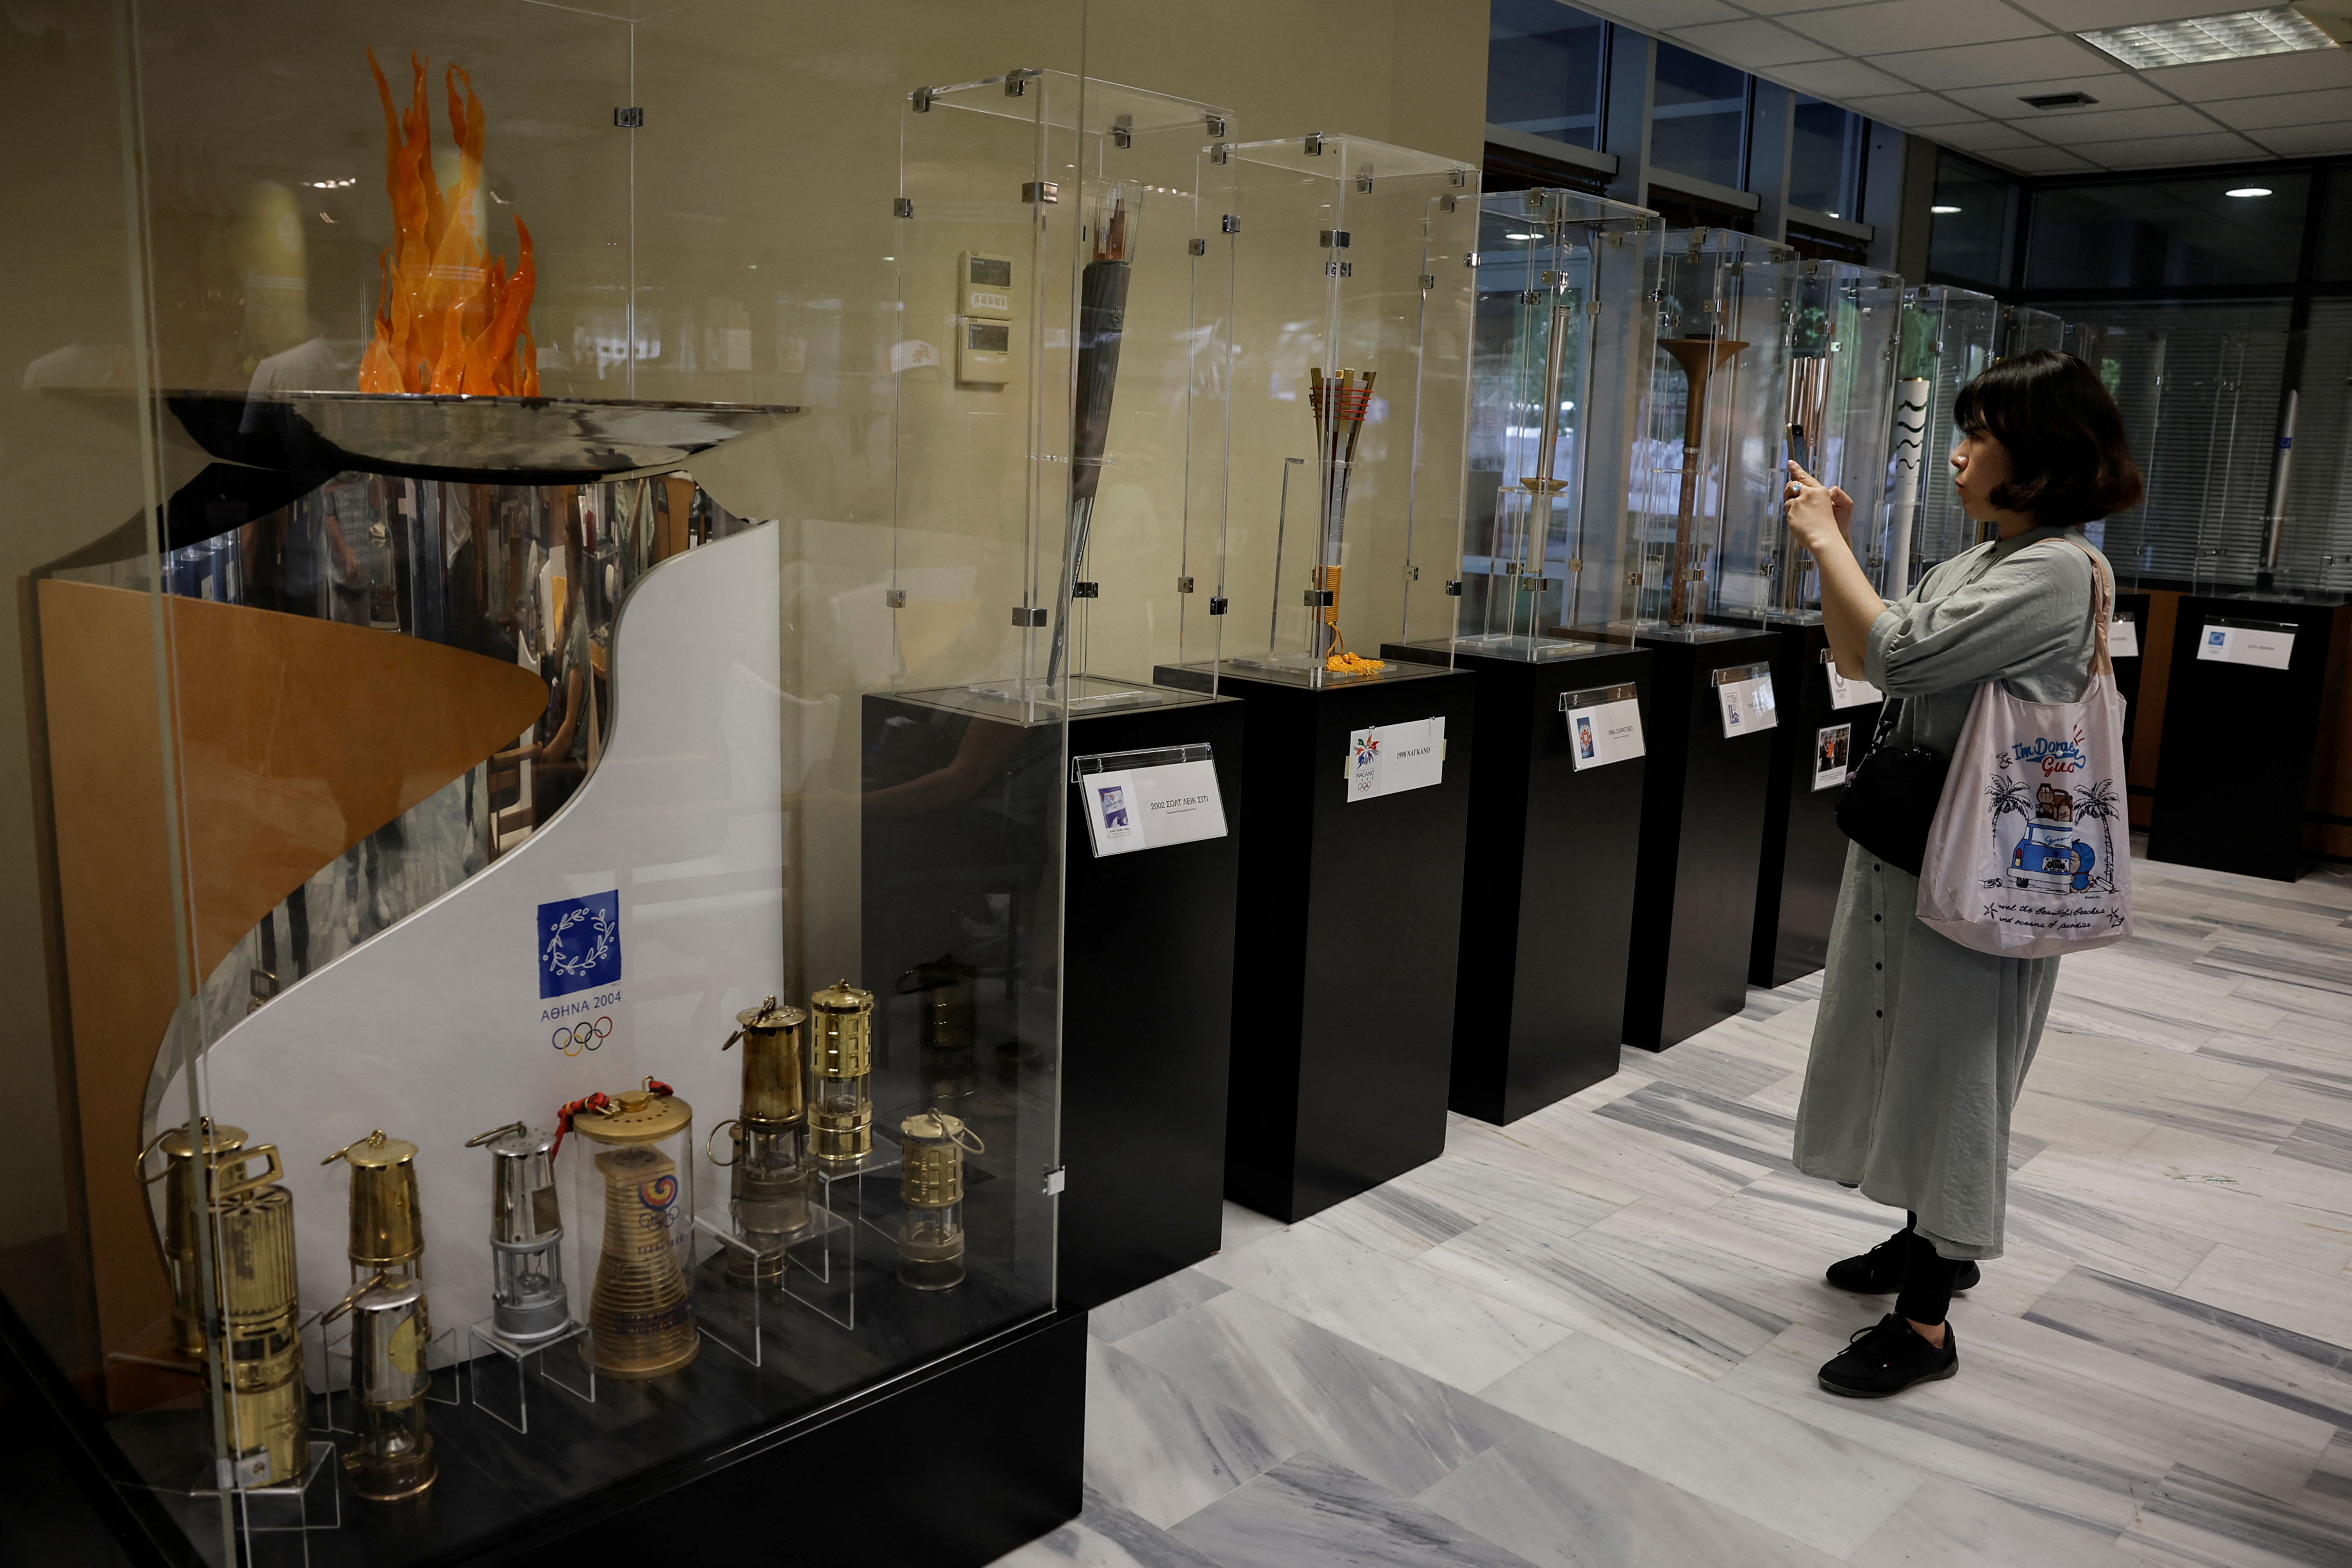 Temporary exhibition of historic Olympic torches in Ancient Olympia